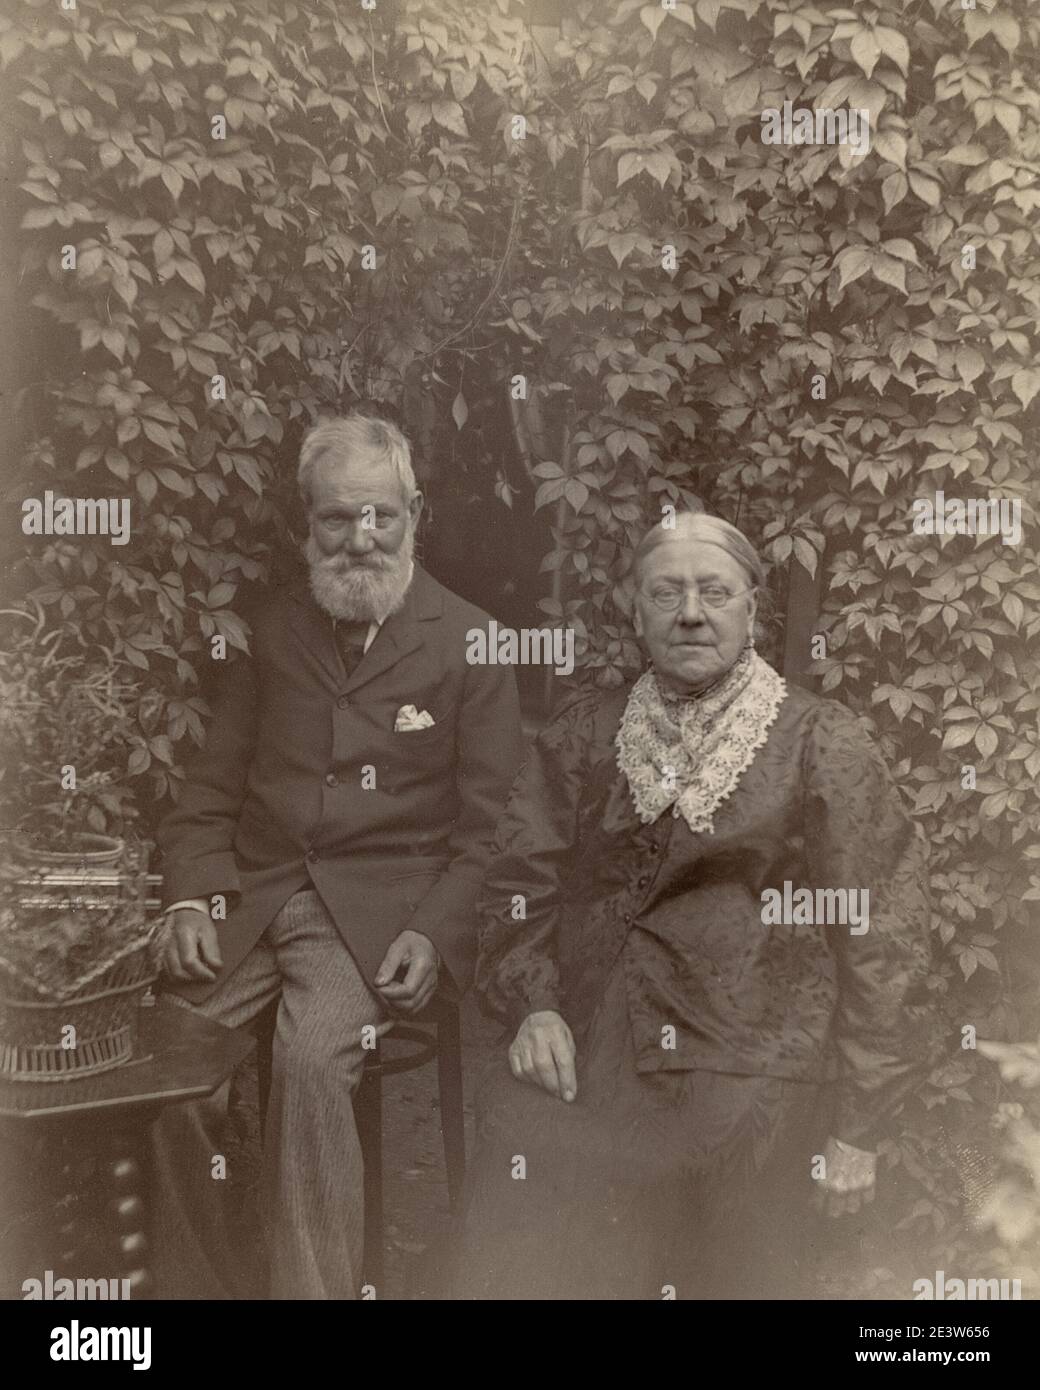 1890s Victorian portrait of and old man and his wife seated in a garden. One of a sequence of ten photographs of friends and family in the same setting. Stock Photo